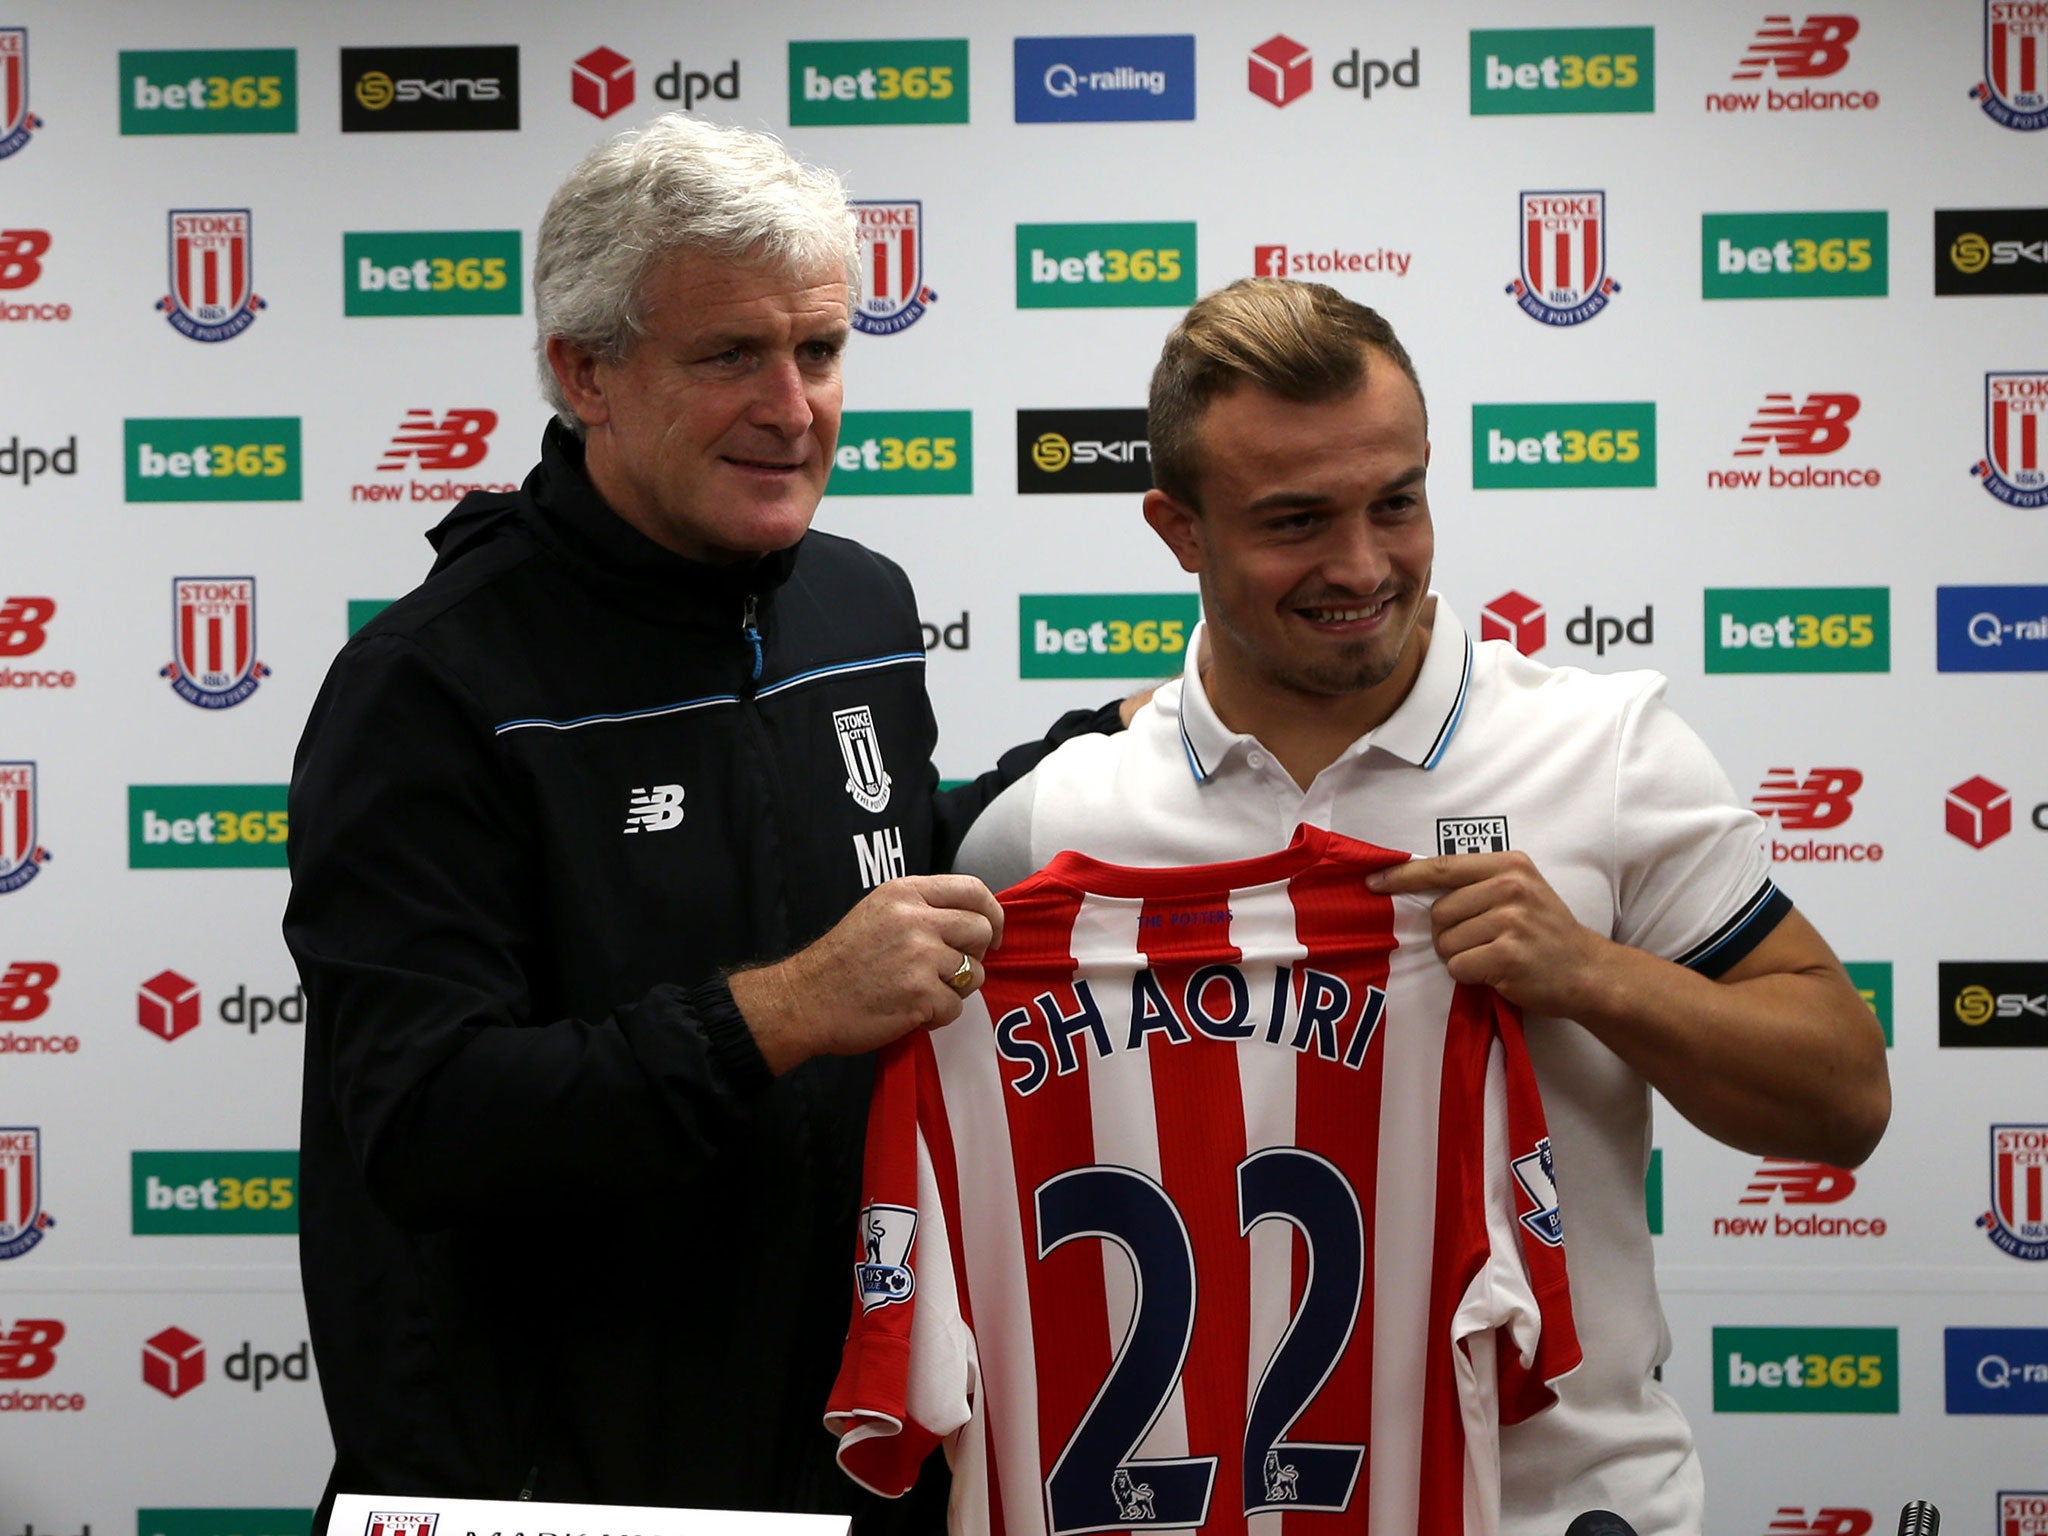 Swiss international Xherdan Shaqiri and Stoke manager Mark Hughes agreethe playmaker’s talents are ideally suited to English football